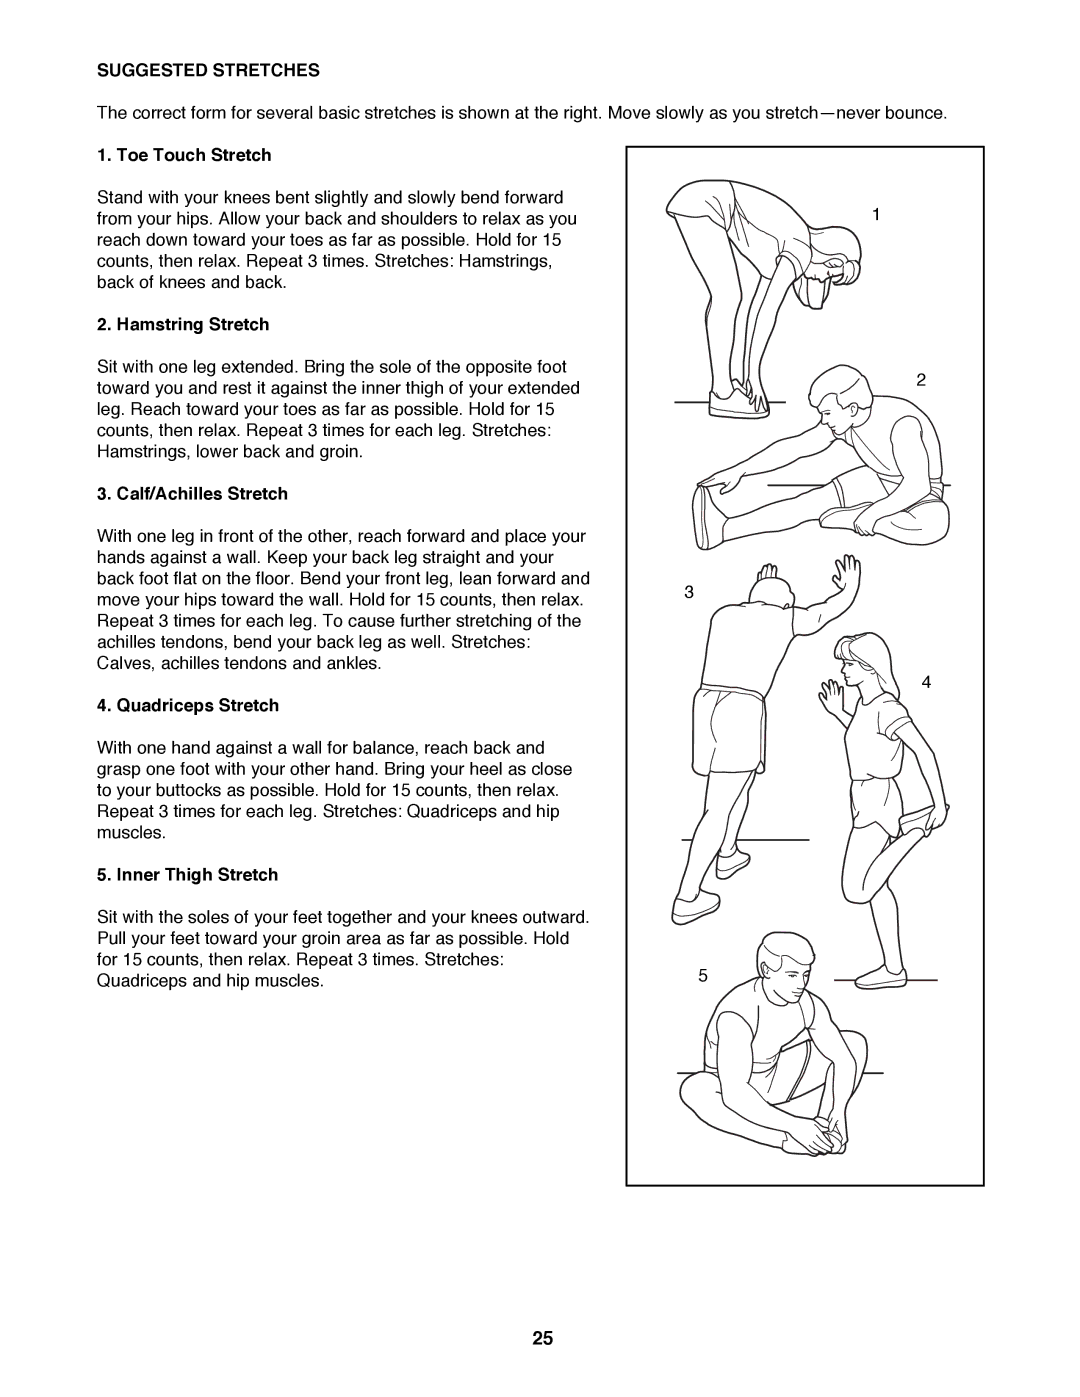 ProForm 831.299481 user manual Suggested Stretches 